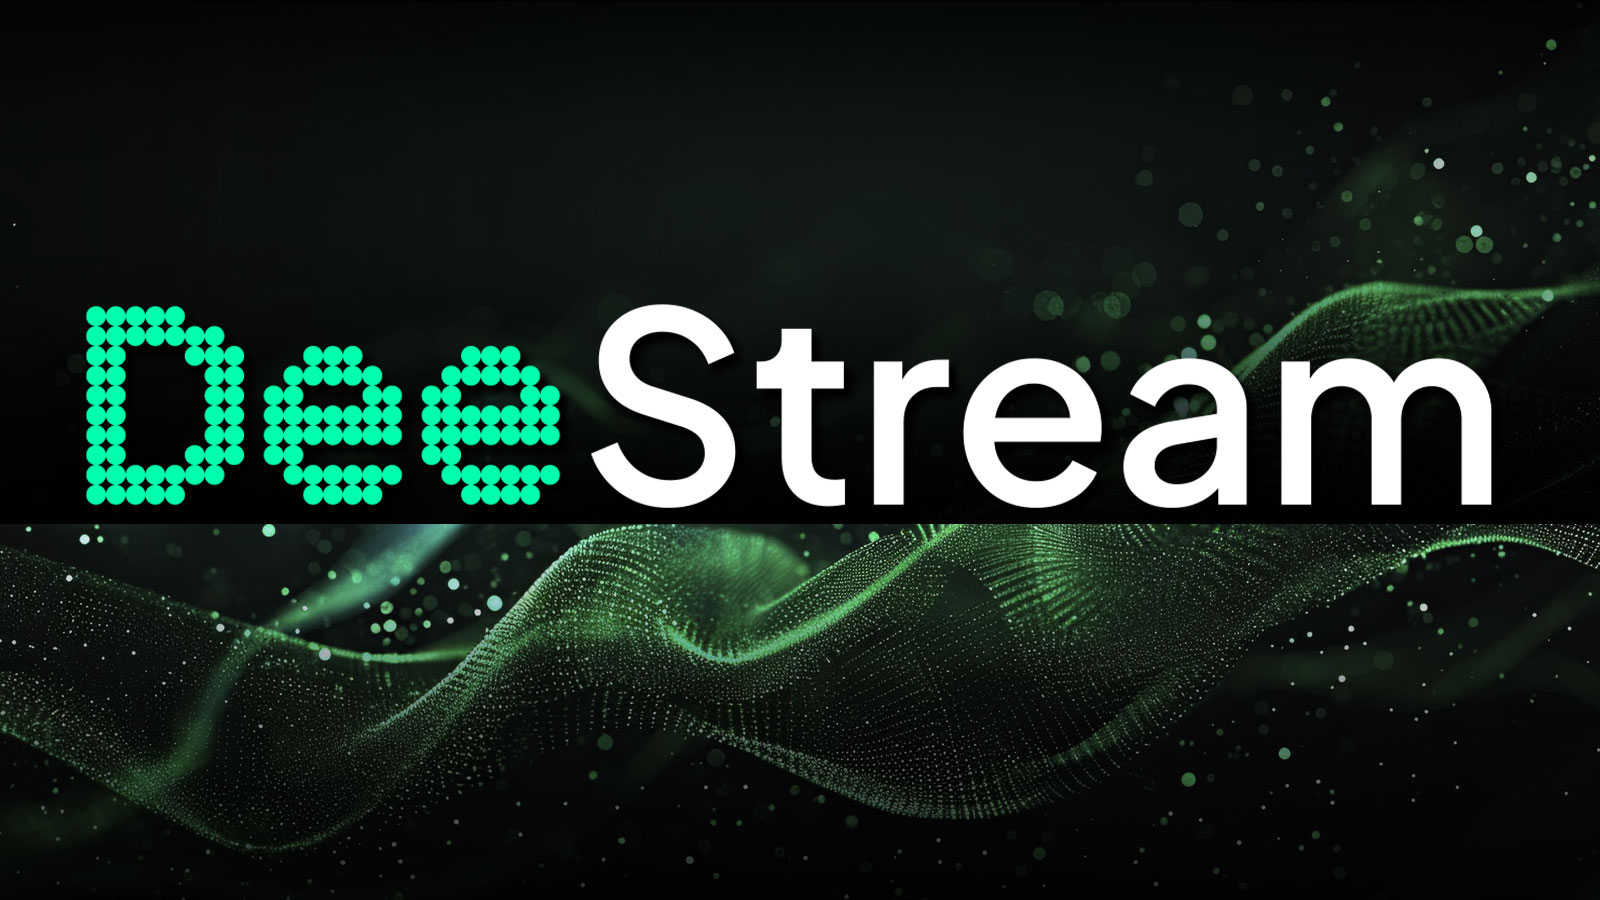 DeeStream (DST) Token Release Q1 Phase On-Boards New Investors as Tron (TRX), Shiba Inu (SHIB) Print Trading Volume Records